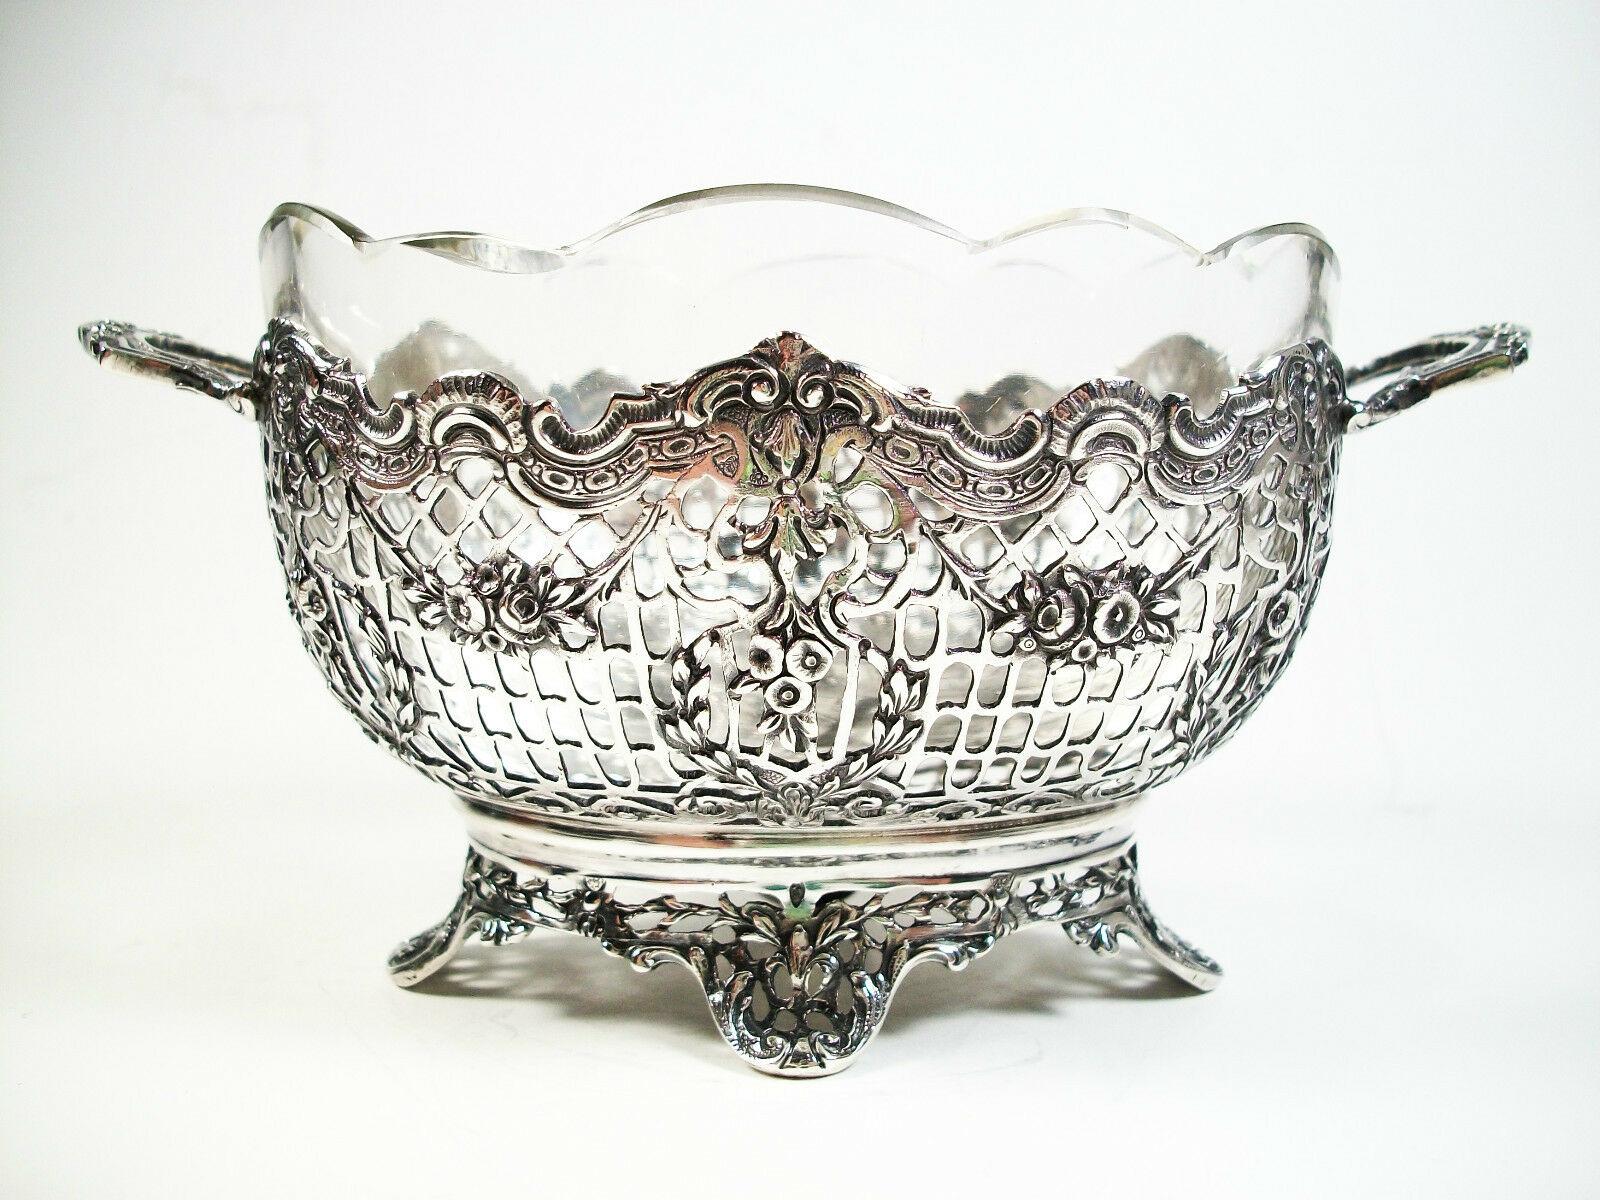 J. L. Schlingloff - Antique twin handled chased and reticulated silver basket - highest quality workmanship by a master Continental silversmith - original scalloped edge glass liner - hallmarked on the base - stamped 800 on the underside of each